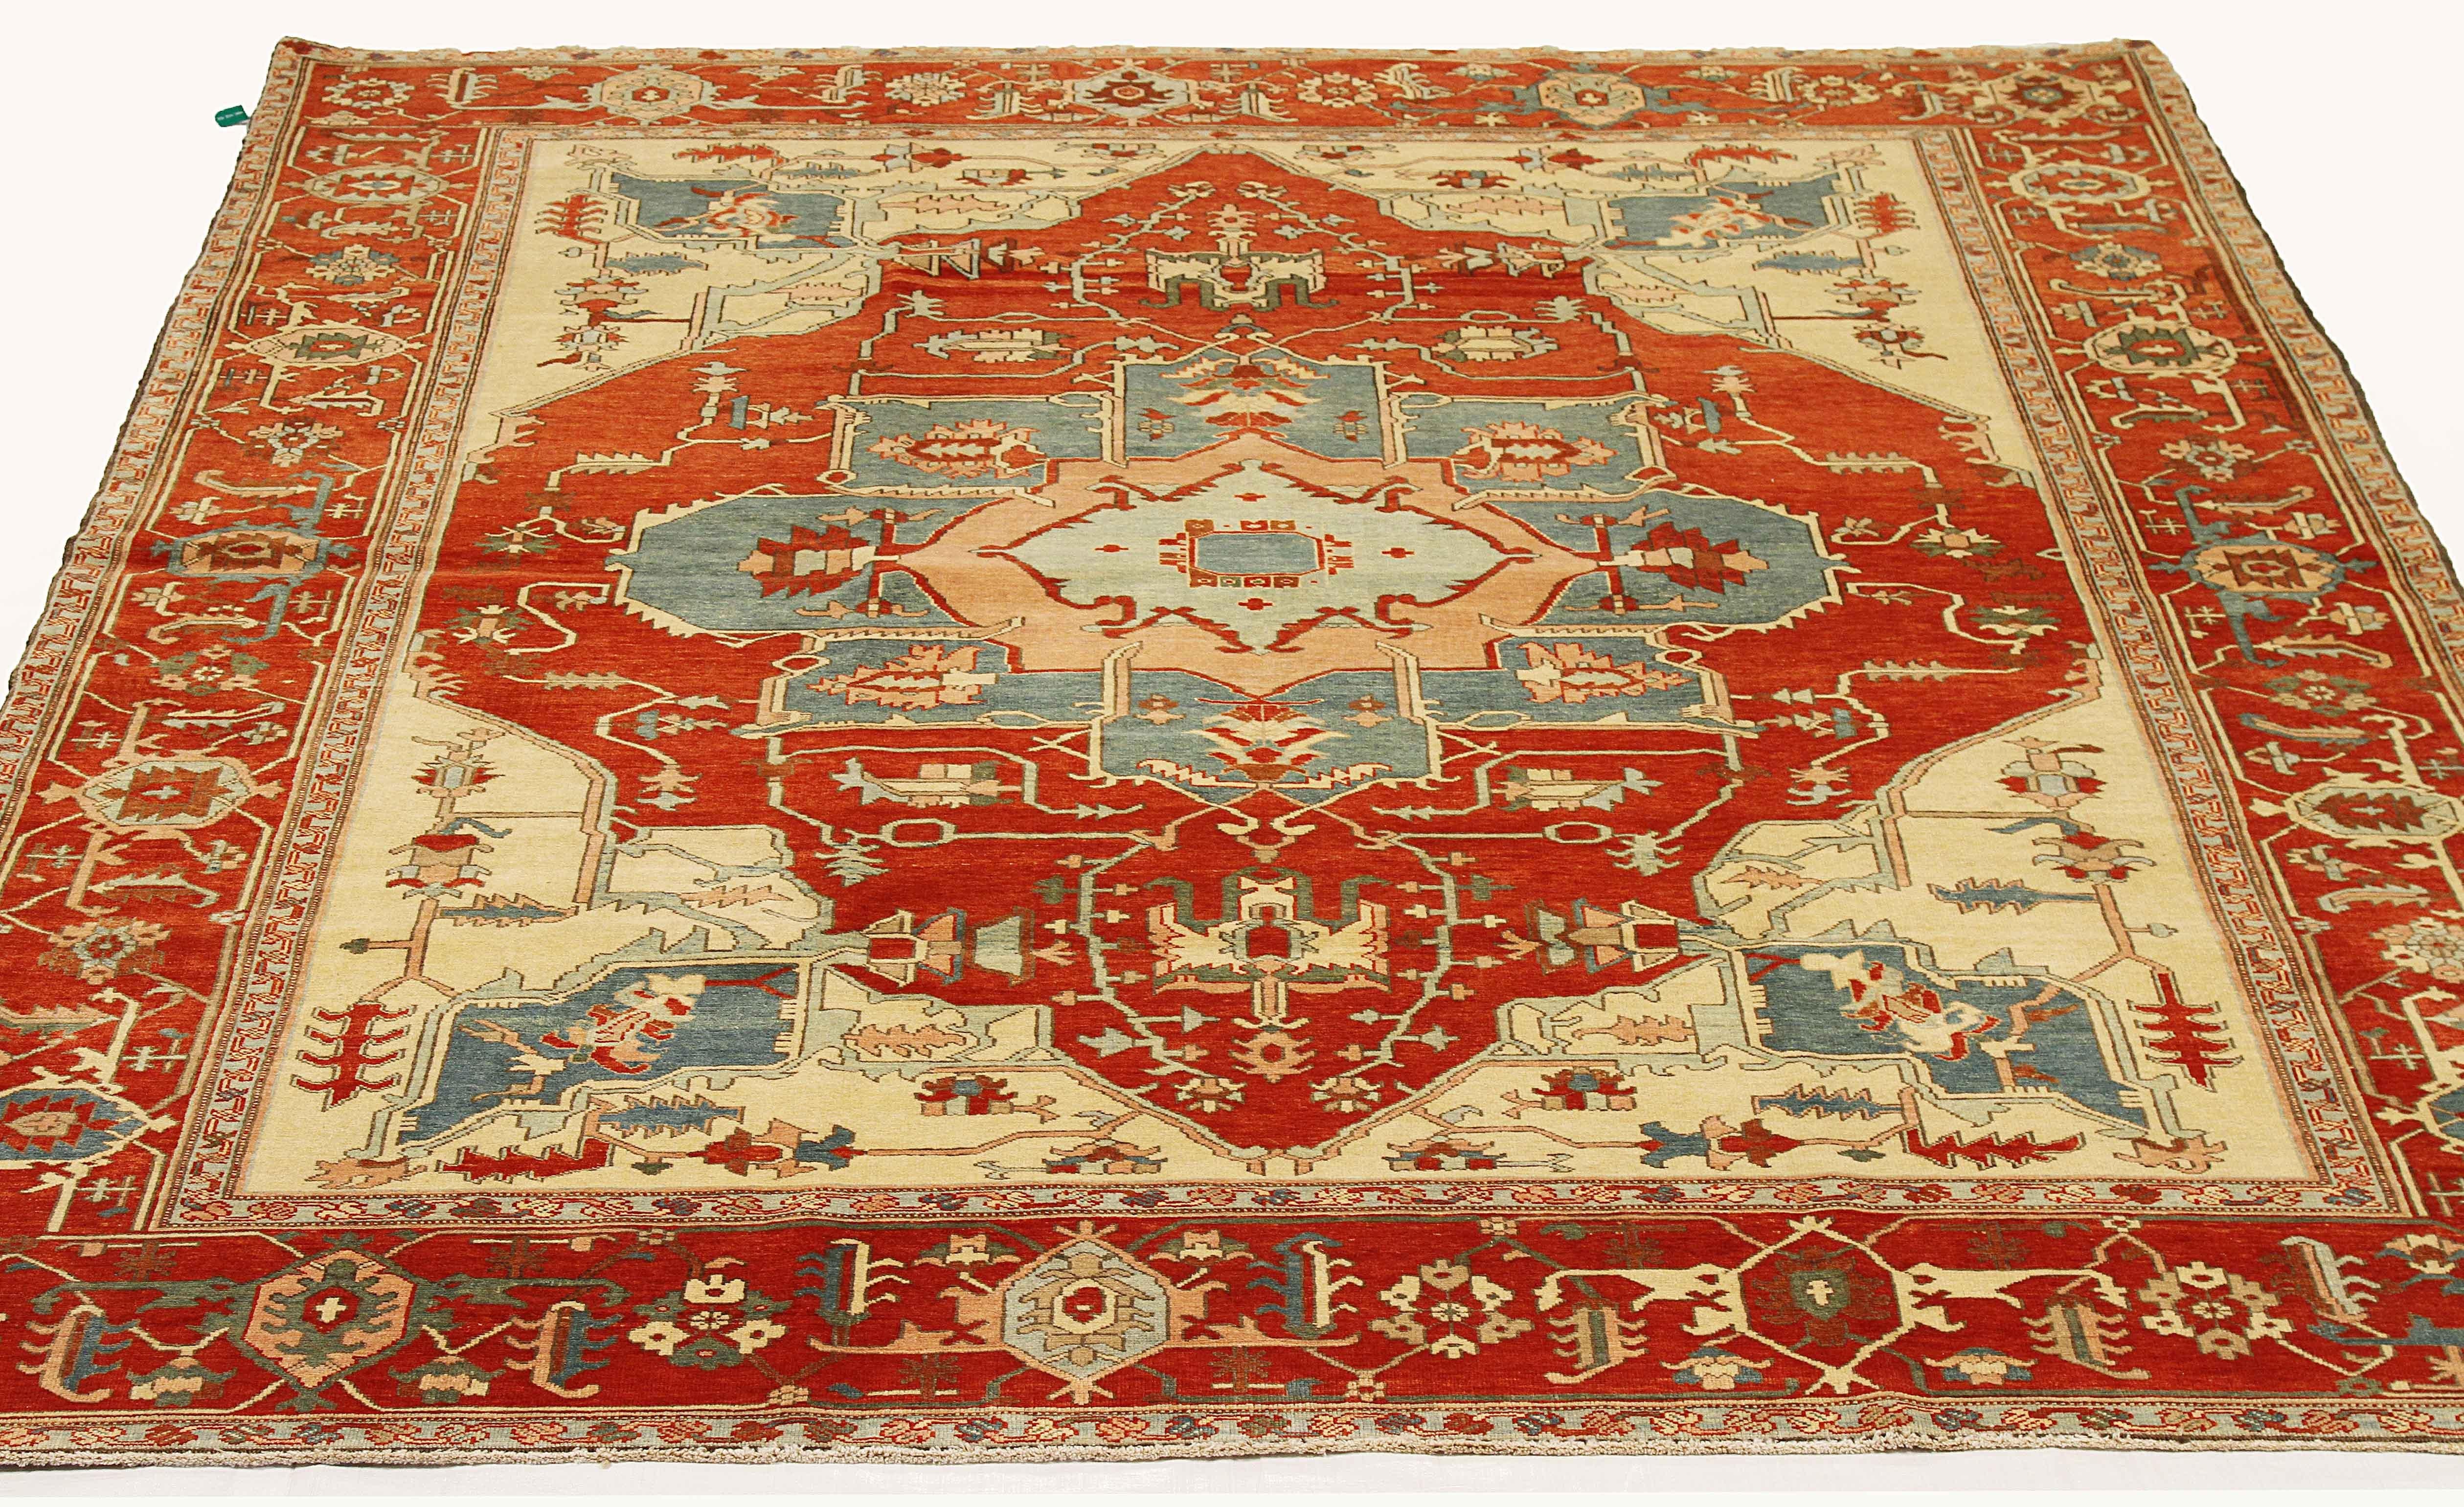 Contemporary Turkish rug handwoven from the finest sheep’s wool and colored with all-natural vegetable dyes that are safe for humans and pets. It’s a traditional Serapi weaving featuring a lovely ensemble of botanical designs in red and gray over an